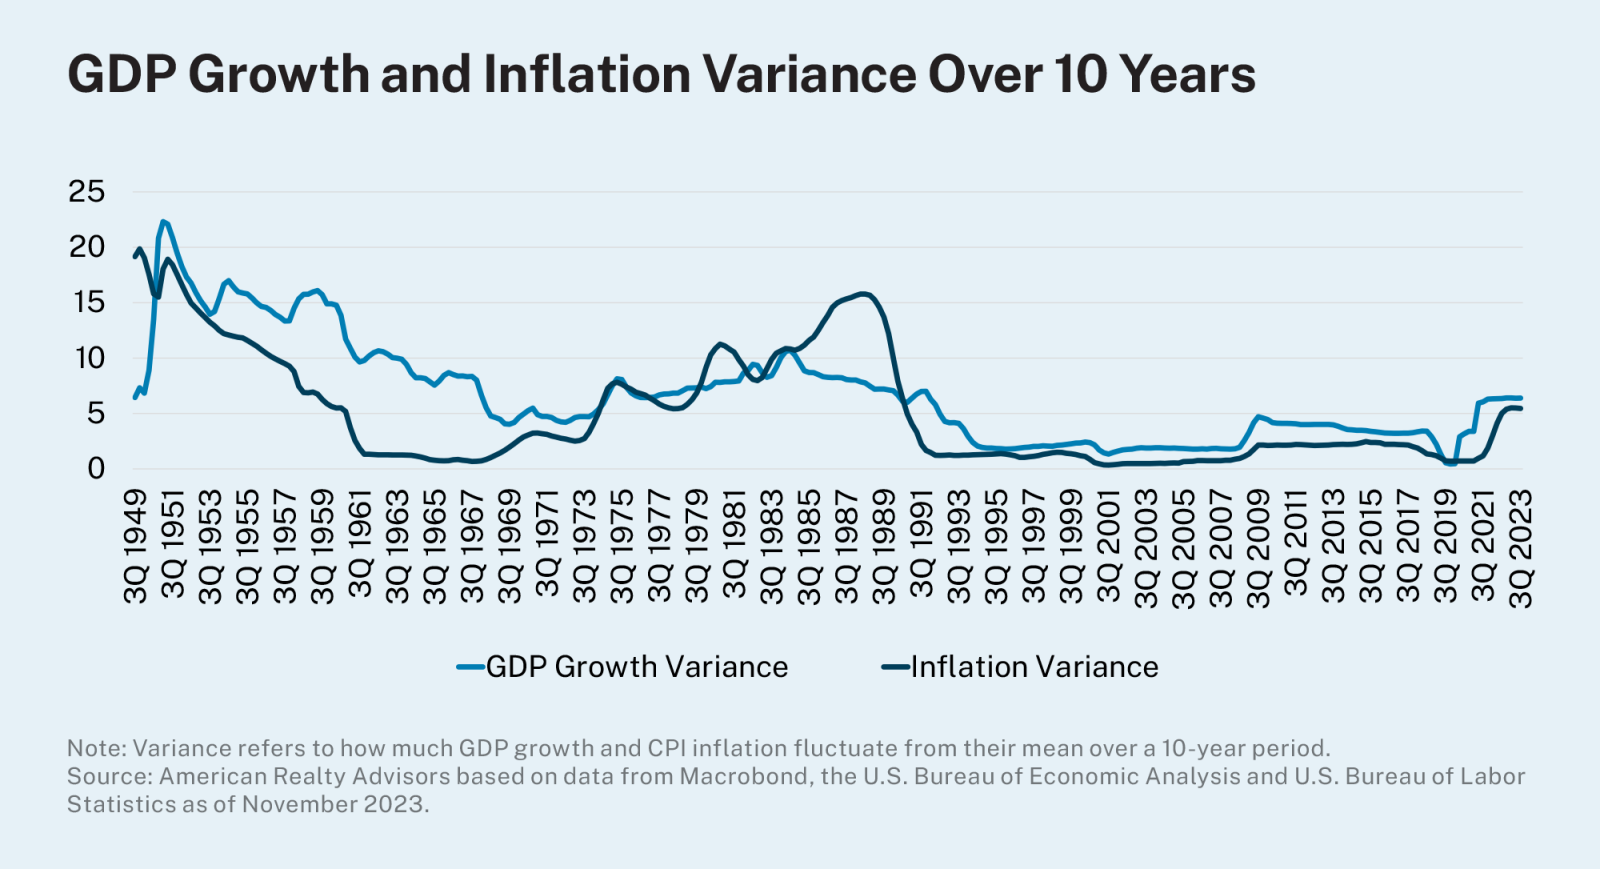 Line chart showing two lines, one demonstrating volatility of GDP growth and one outlining volatility of inflation from 1949 through 2023. 